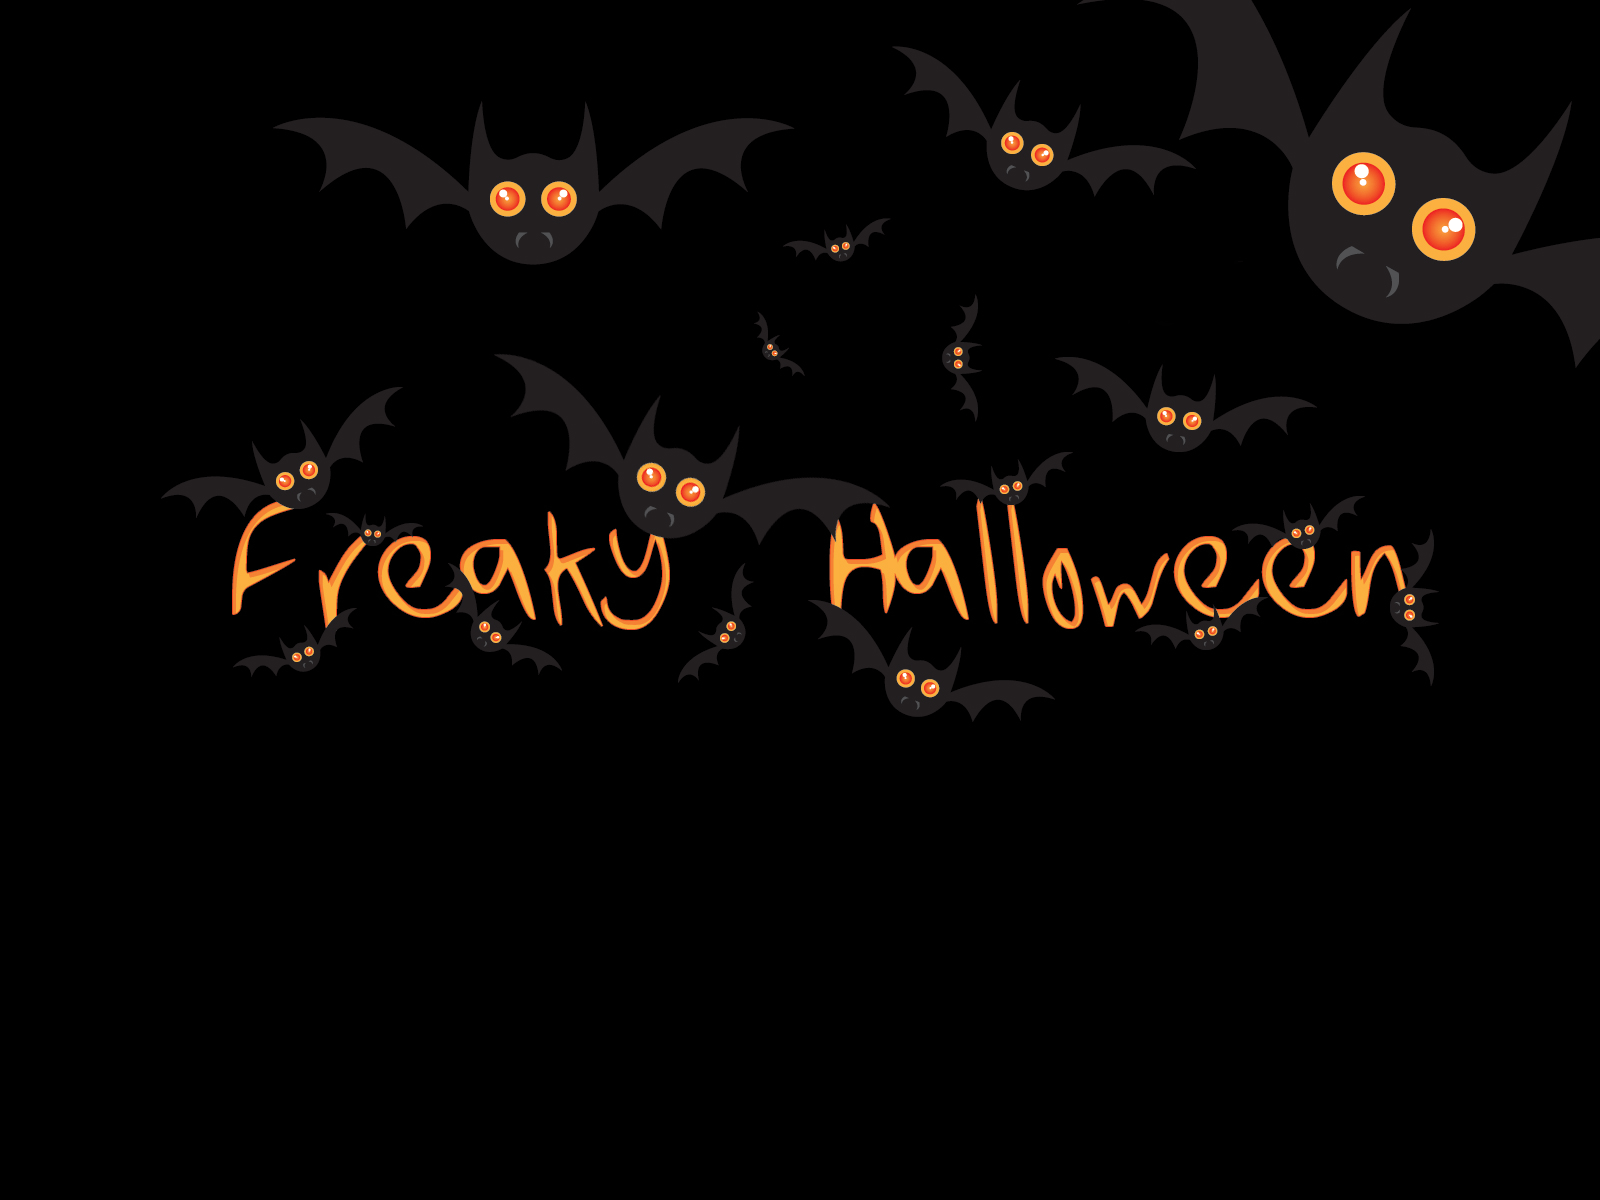 Wele In To Collection Of Halloween Pc Desktop Wallpaper Based